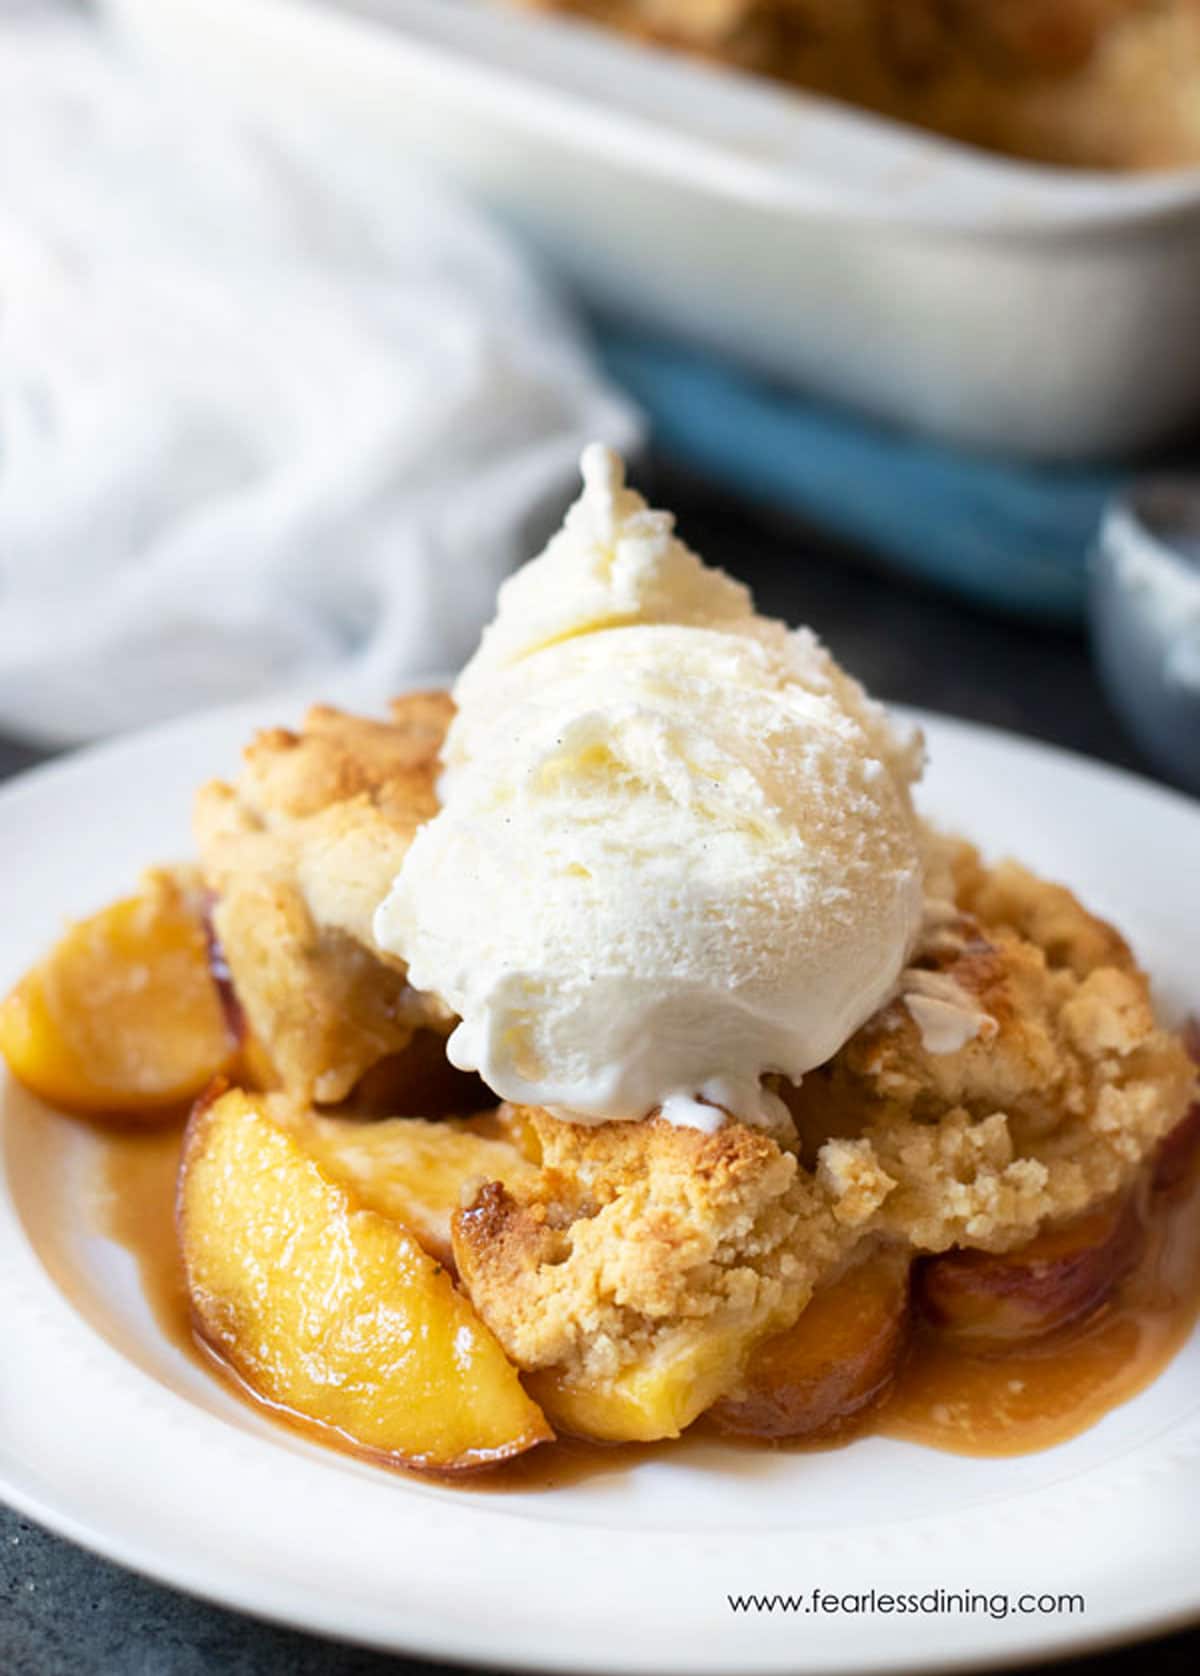 A wide bowl full of peach cobbler topped with ice cream.